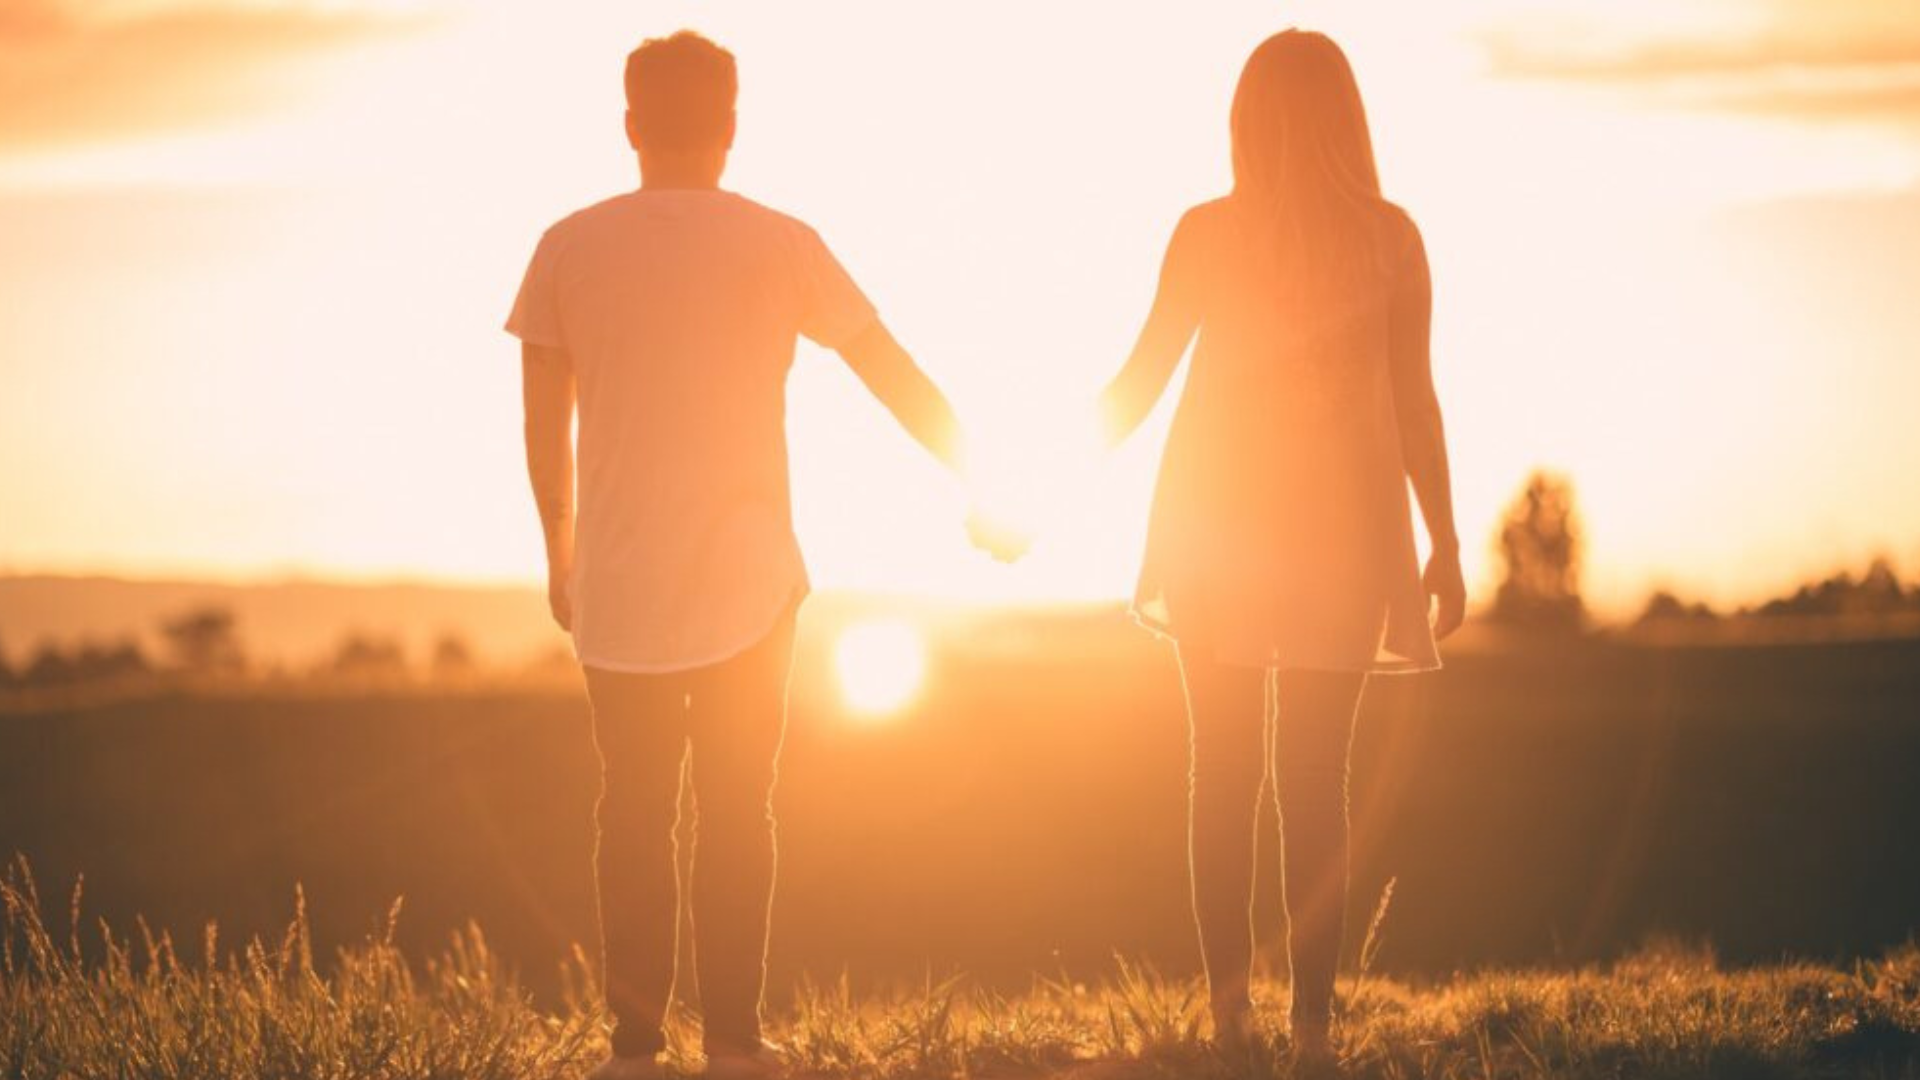 Two people holding their hands while standing and looking at the sunset